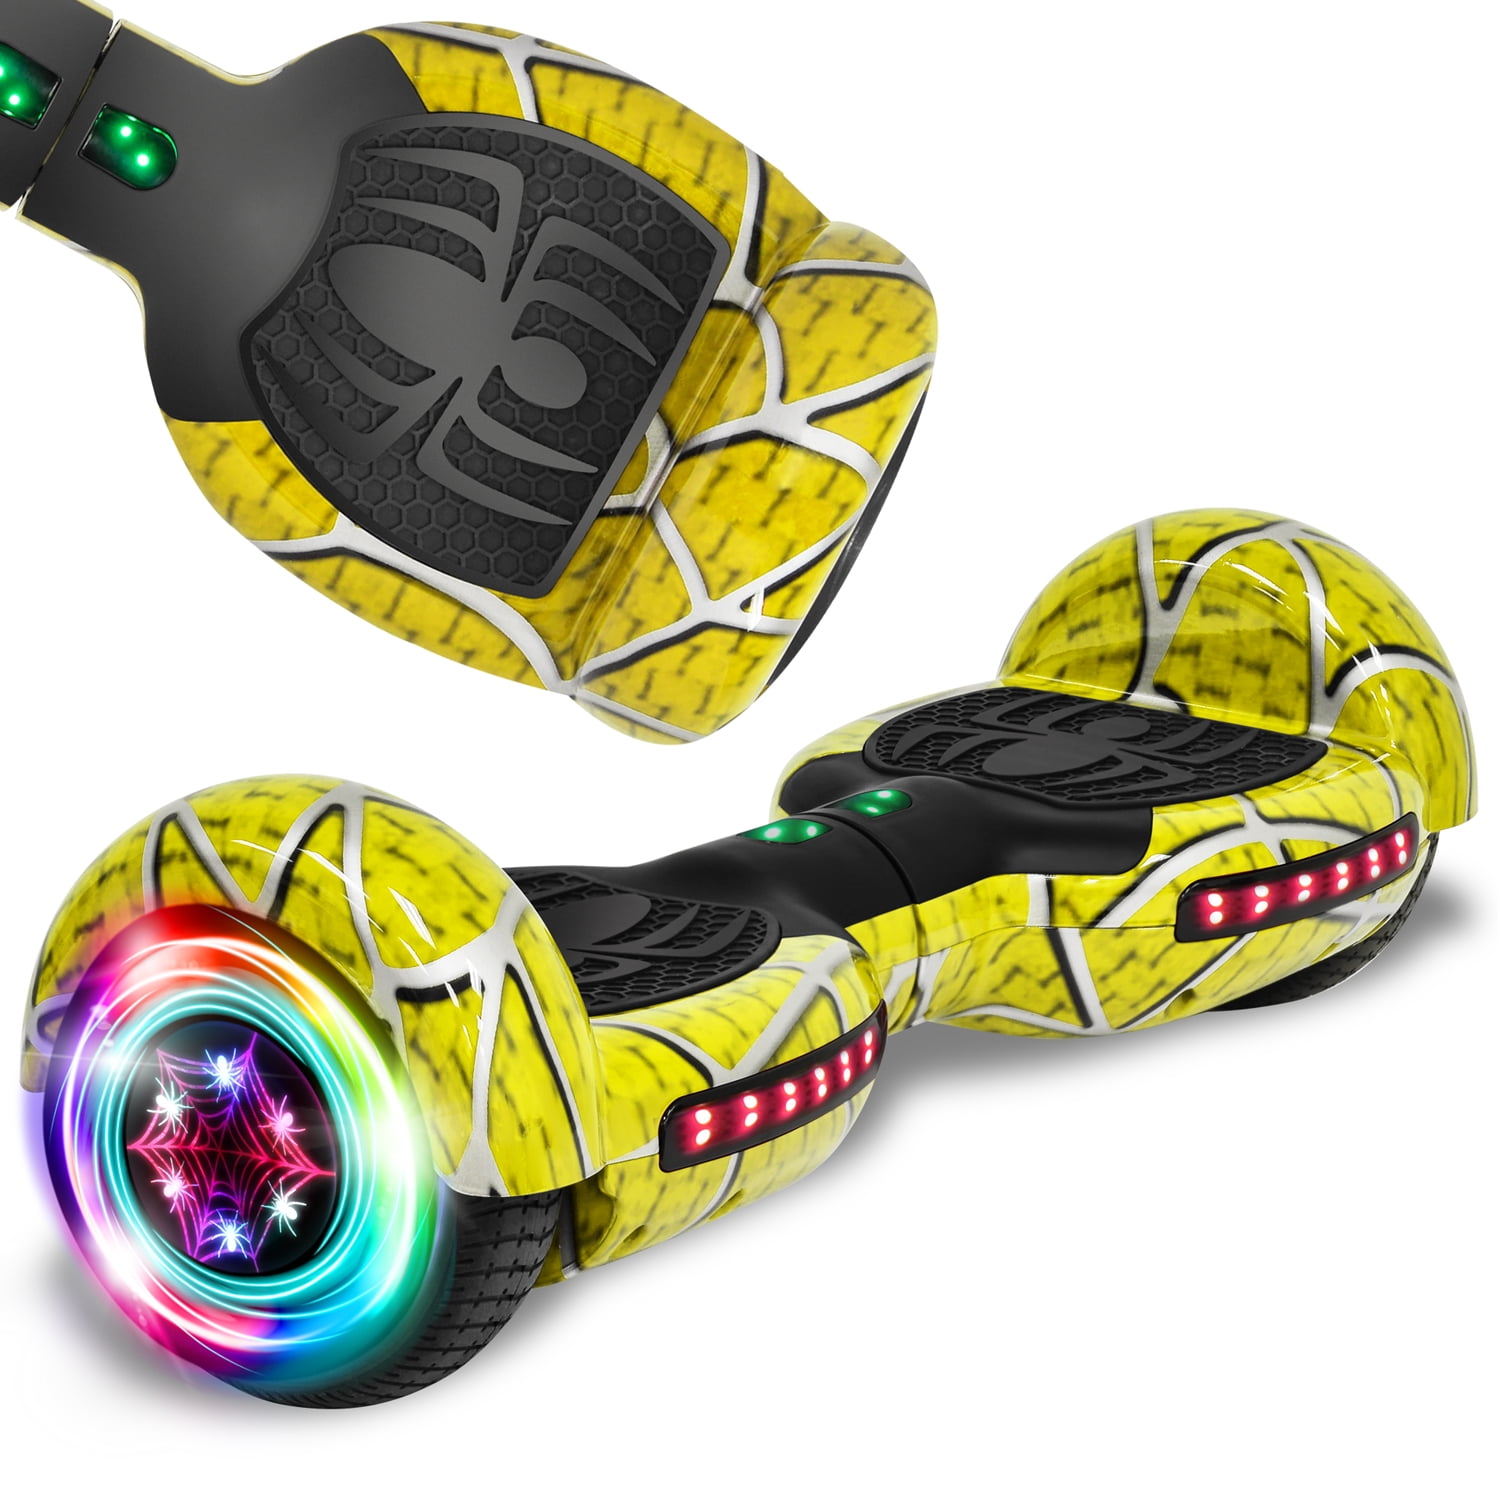 UL2272 Certified Self Balancing Hover Board Electric Scooter Tomoloo Hoverboard Off Road with Bluetooth and LED Lights 8.5'' All Terrain Hoverboards for Kids and Adults with APP Control 